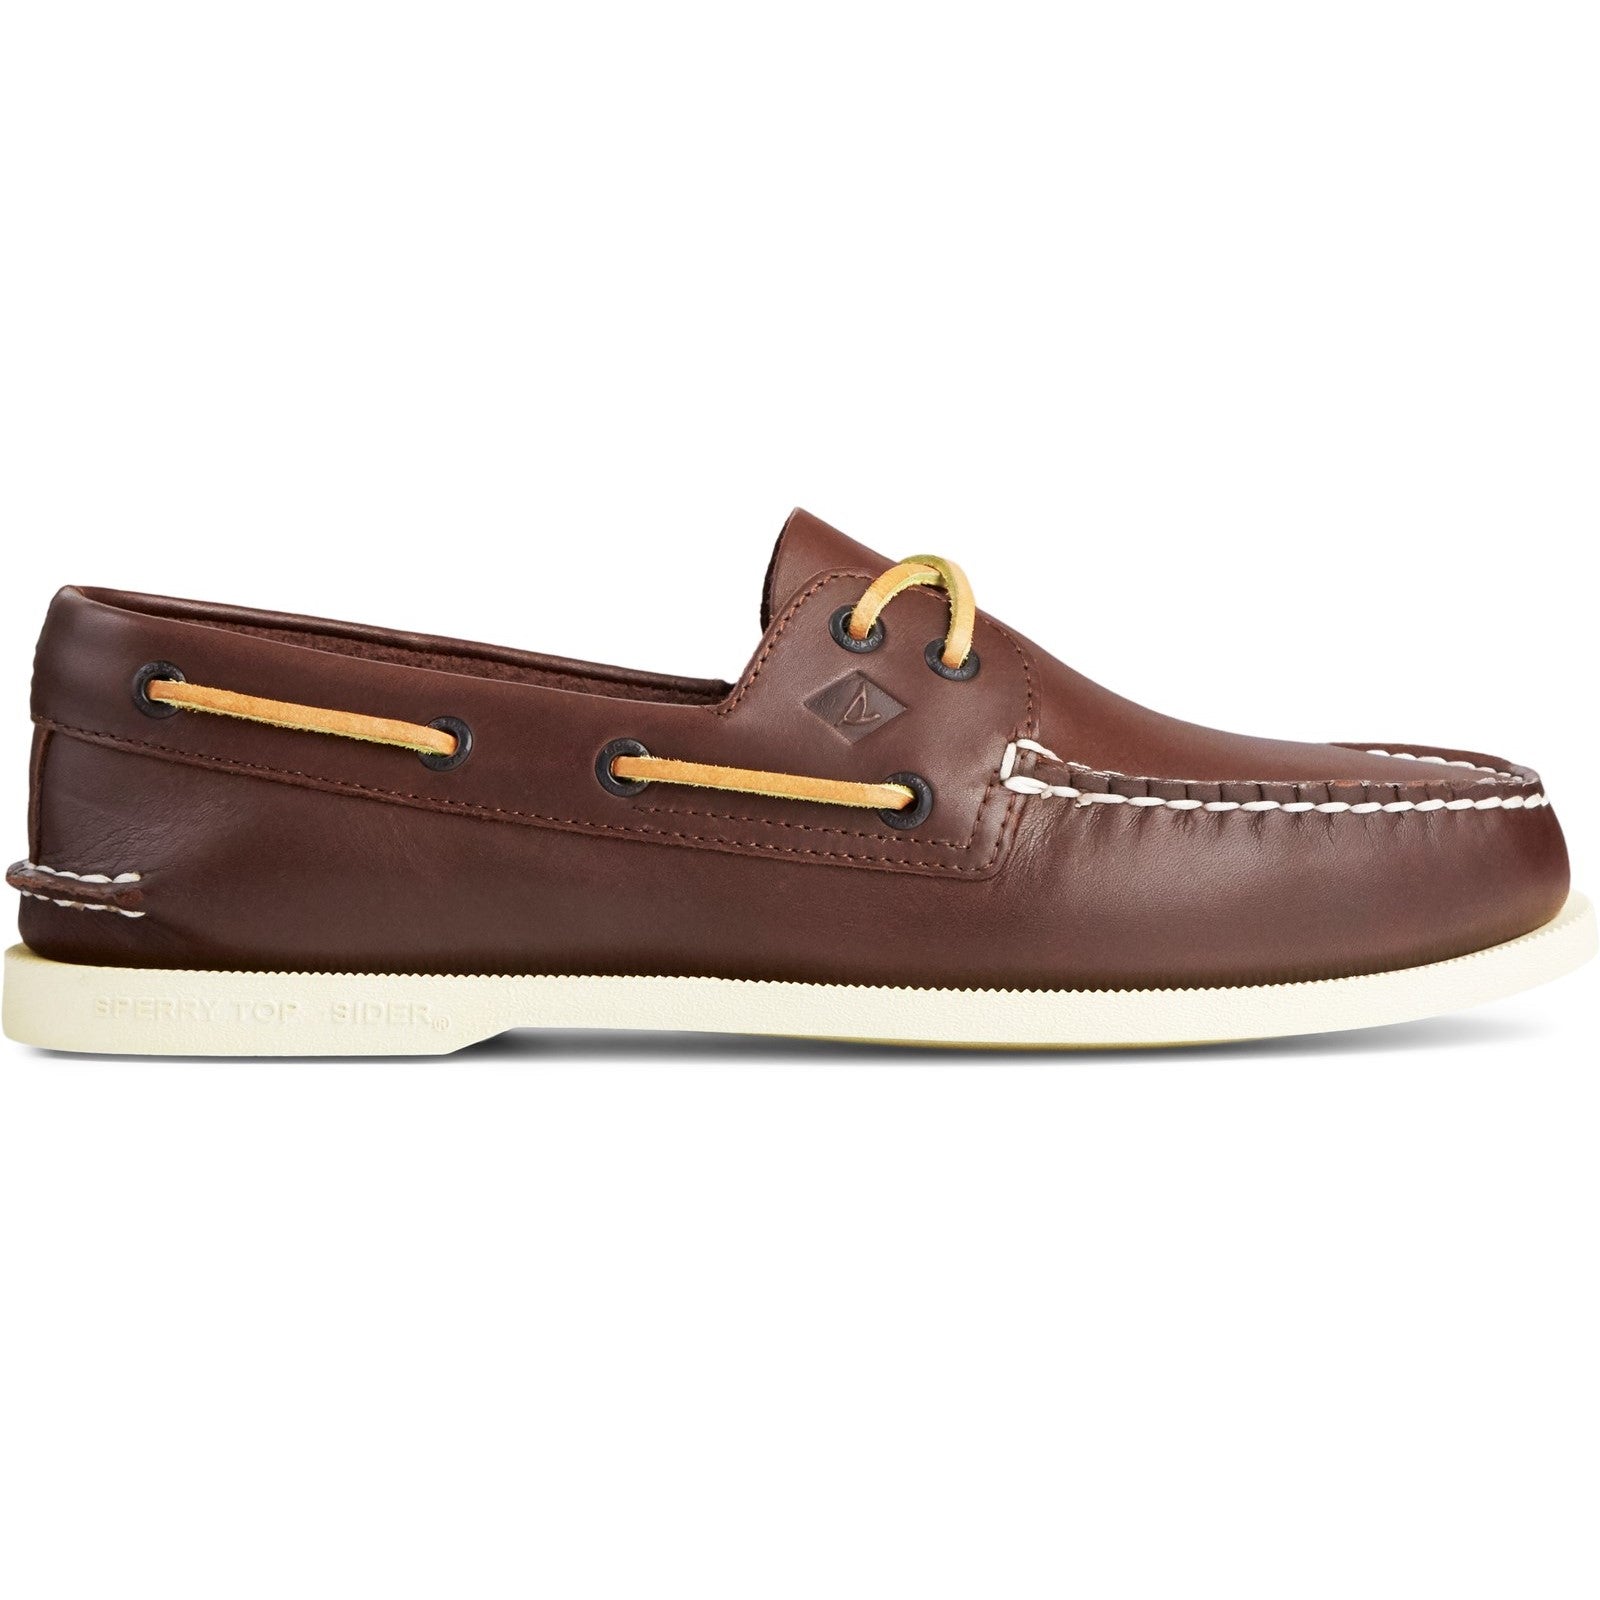 Sperry Mens Authentic Original Leather Boat Shoes - Brown